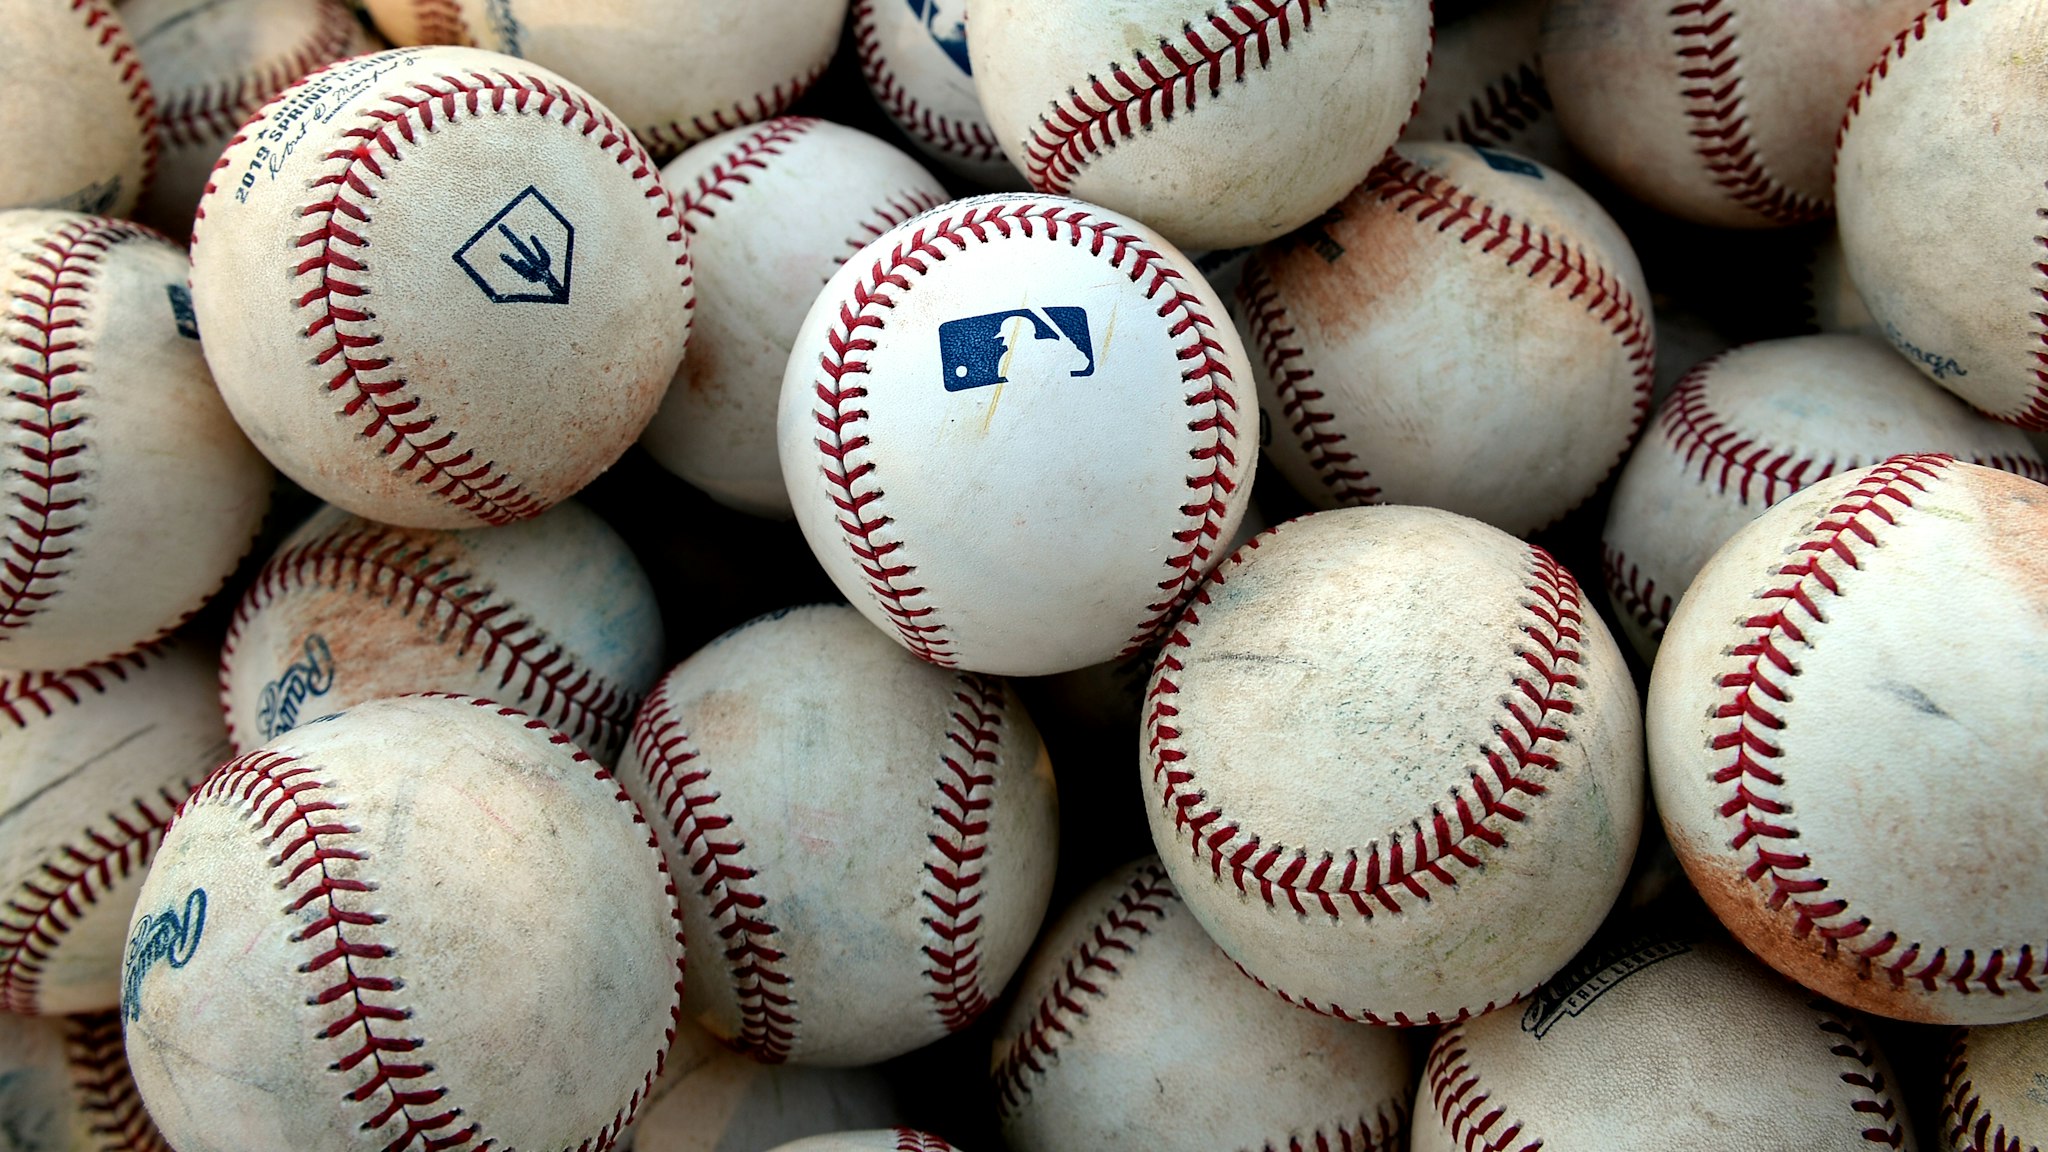 A detail shot of the MLB logo on batting practice balls before the game against the Peoria Javelinas and the Mesa Solar Sox at Sloan Park on Saturday, September 21, 2019 in Mesa, Arizona. (Photo by Jill Weisleder/MLB Photos via Getty Images)